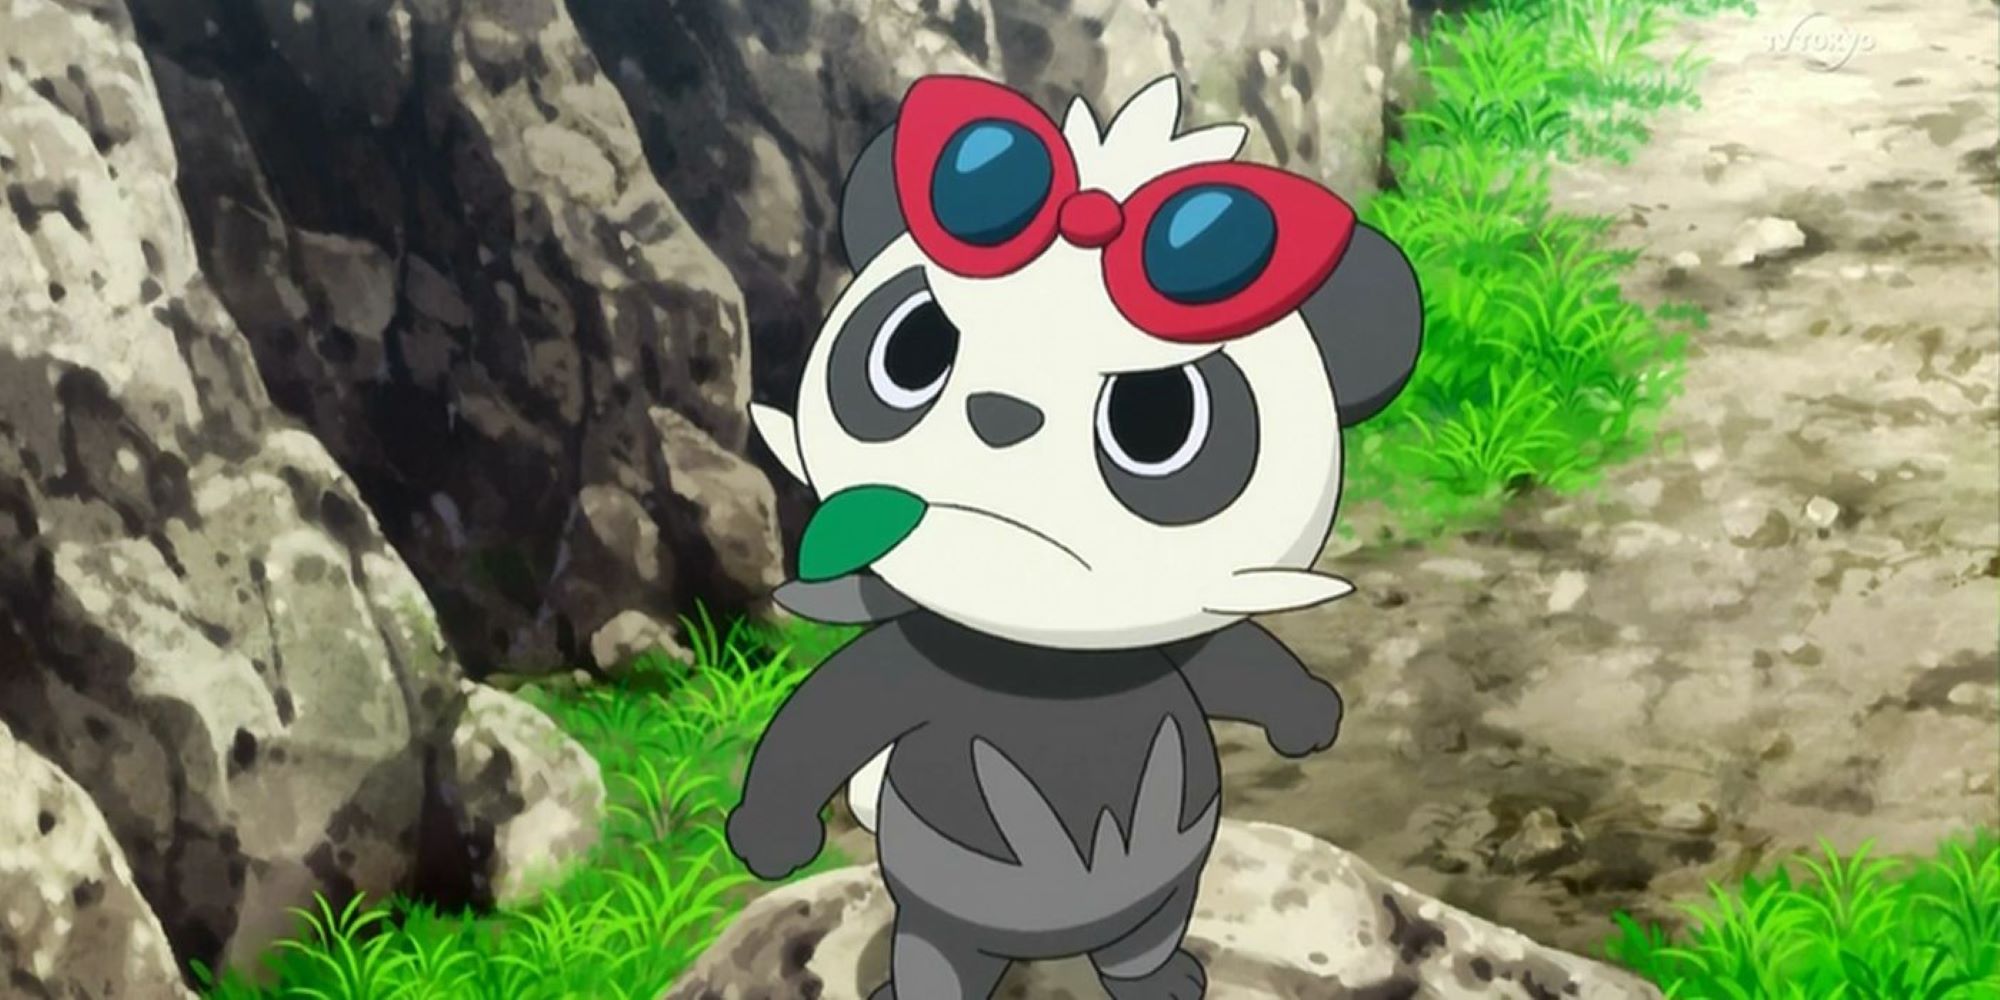 Pancham With Goggles And Leaf In Mouth